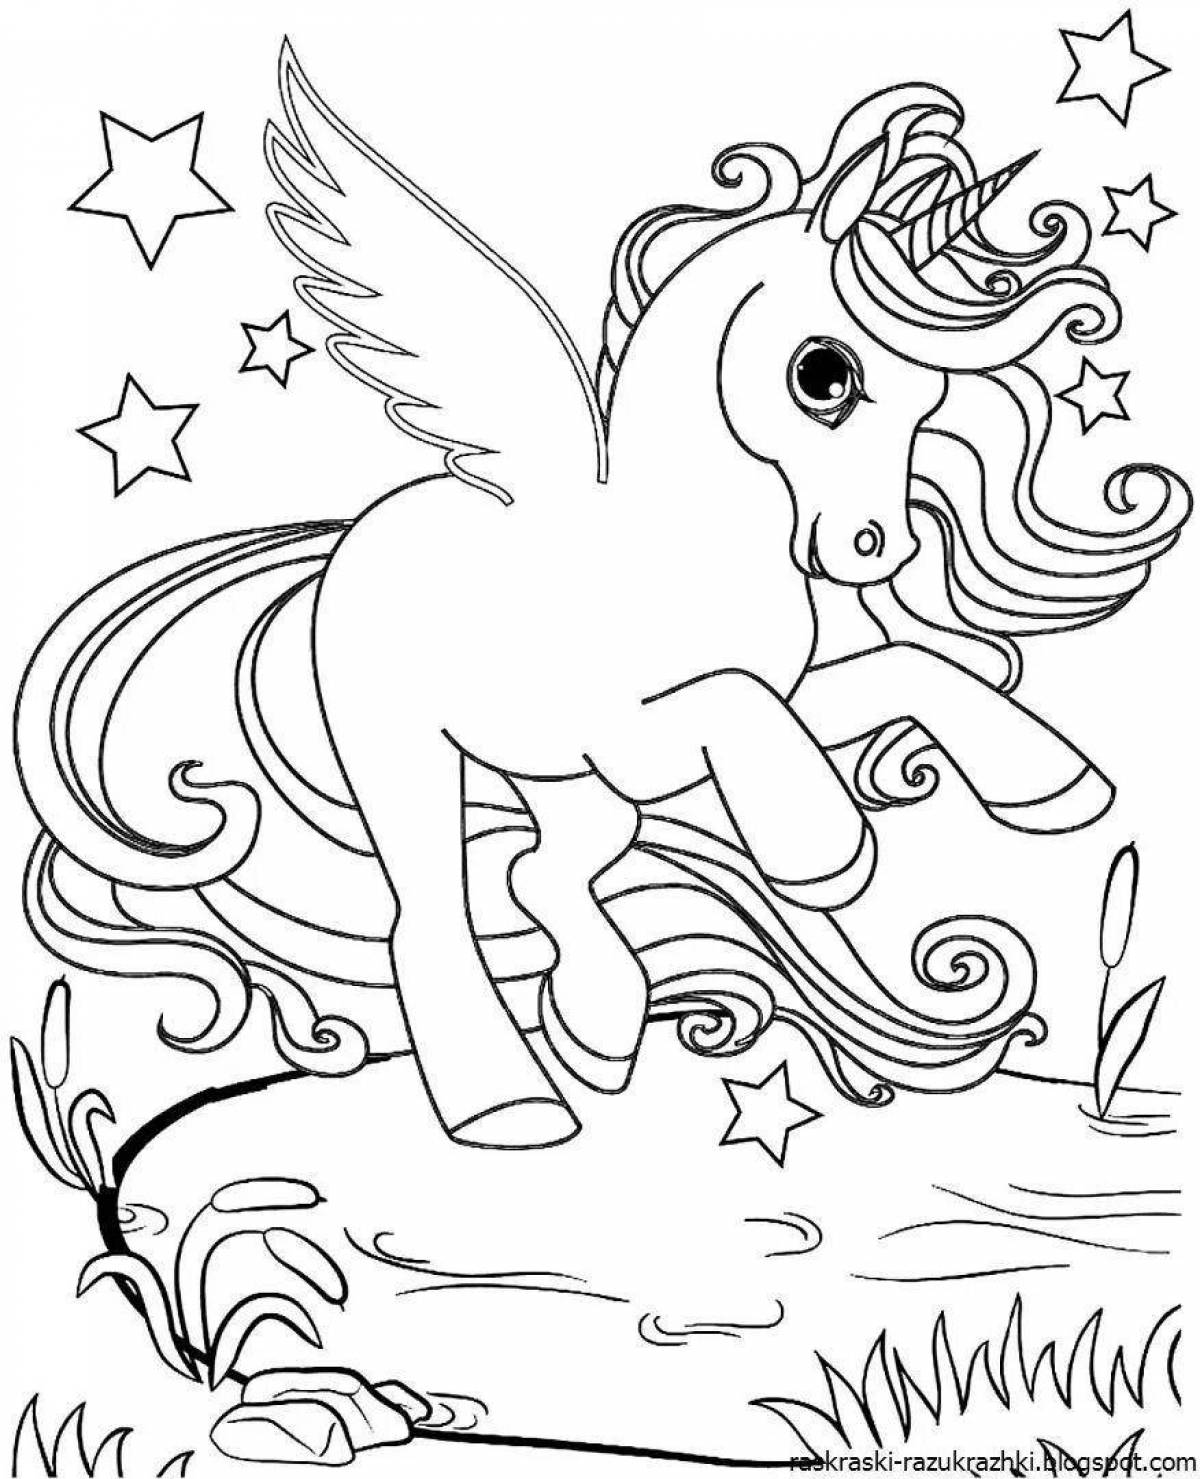 Blooming coloring book for girls 7 years old unicorn